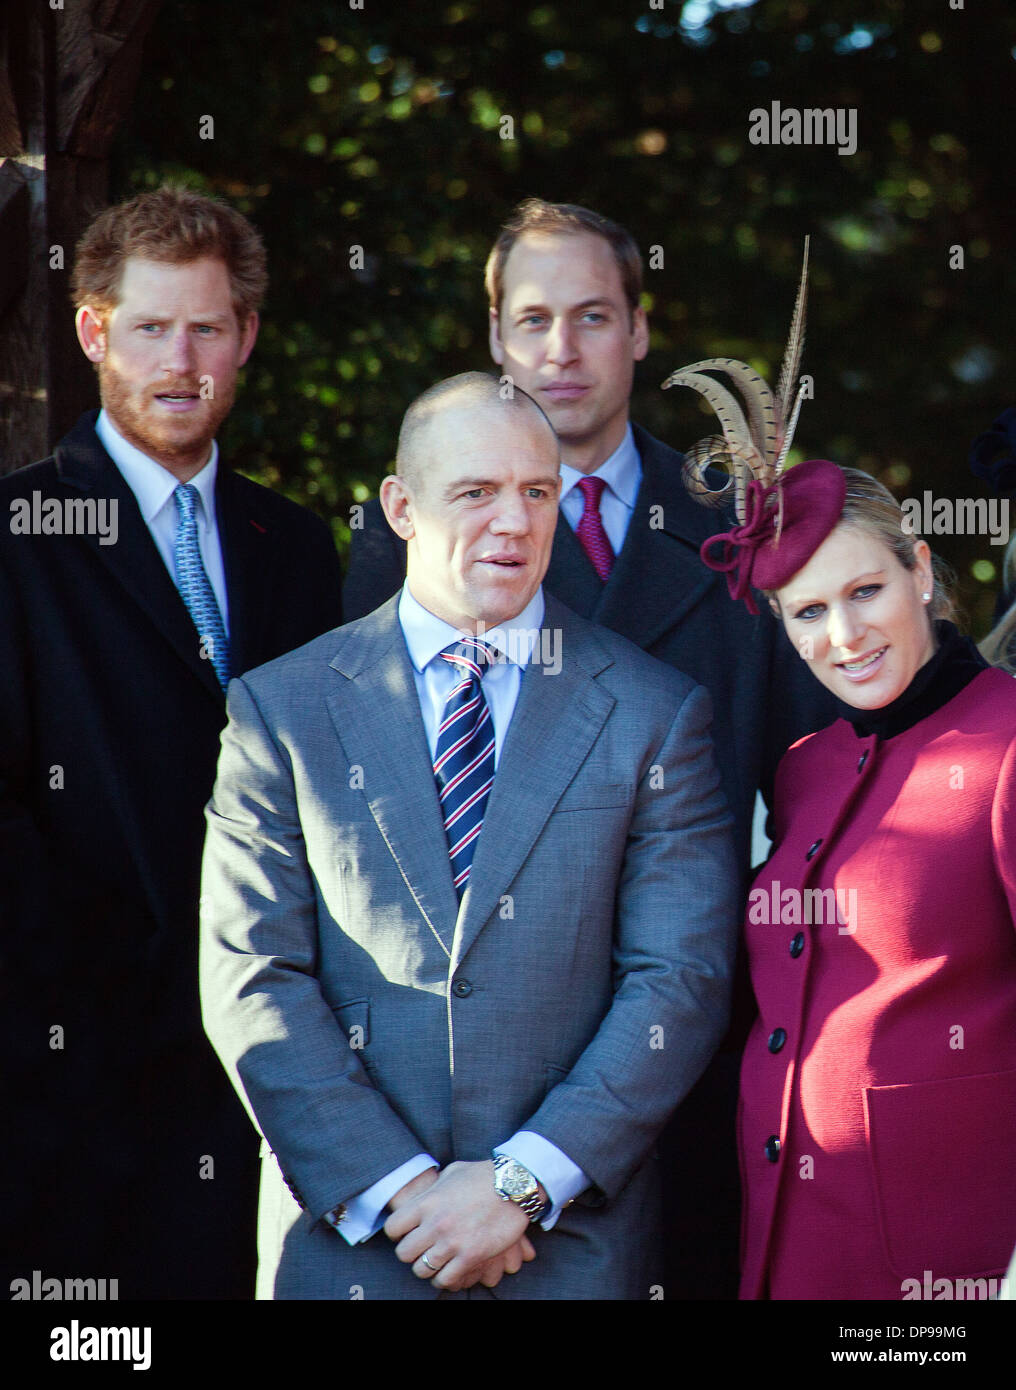 Prince Harry, Prince William, Zara Phillips and Mike Tindall attend the  Royal Family service in Sandringham on Christmas Day 201 Stock Photo - Alamy